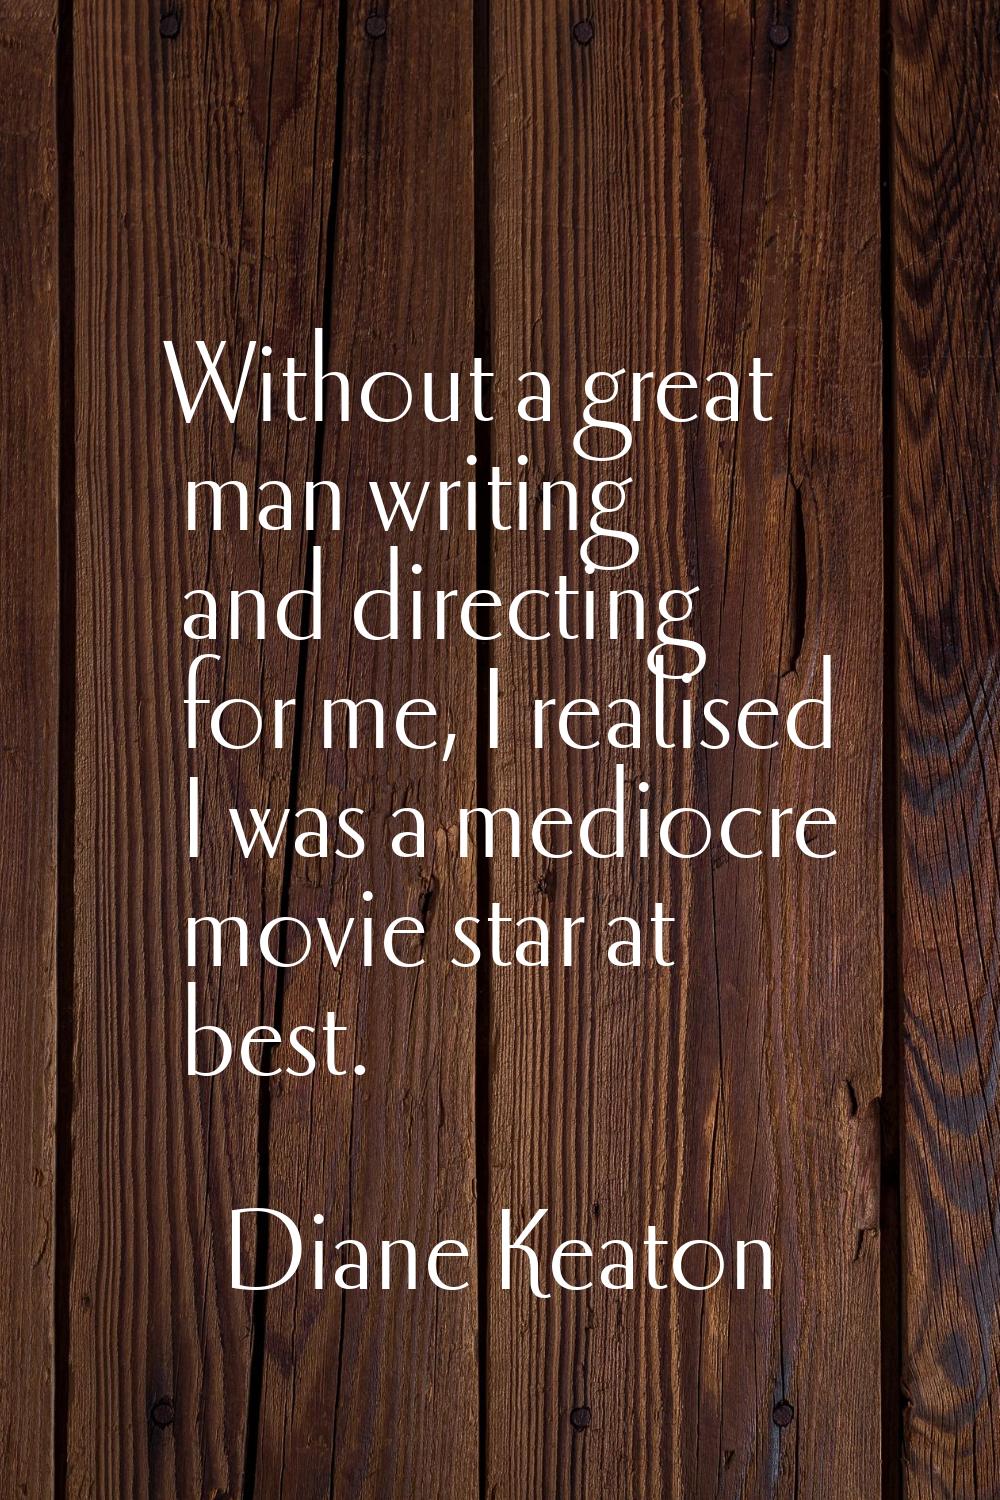 Without a great man writing and directing for me, I realised I was a mediocre movie star at best.